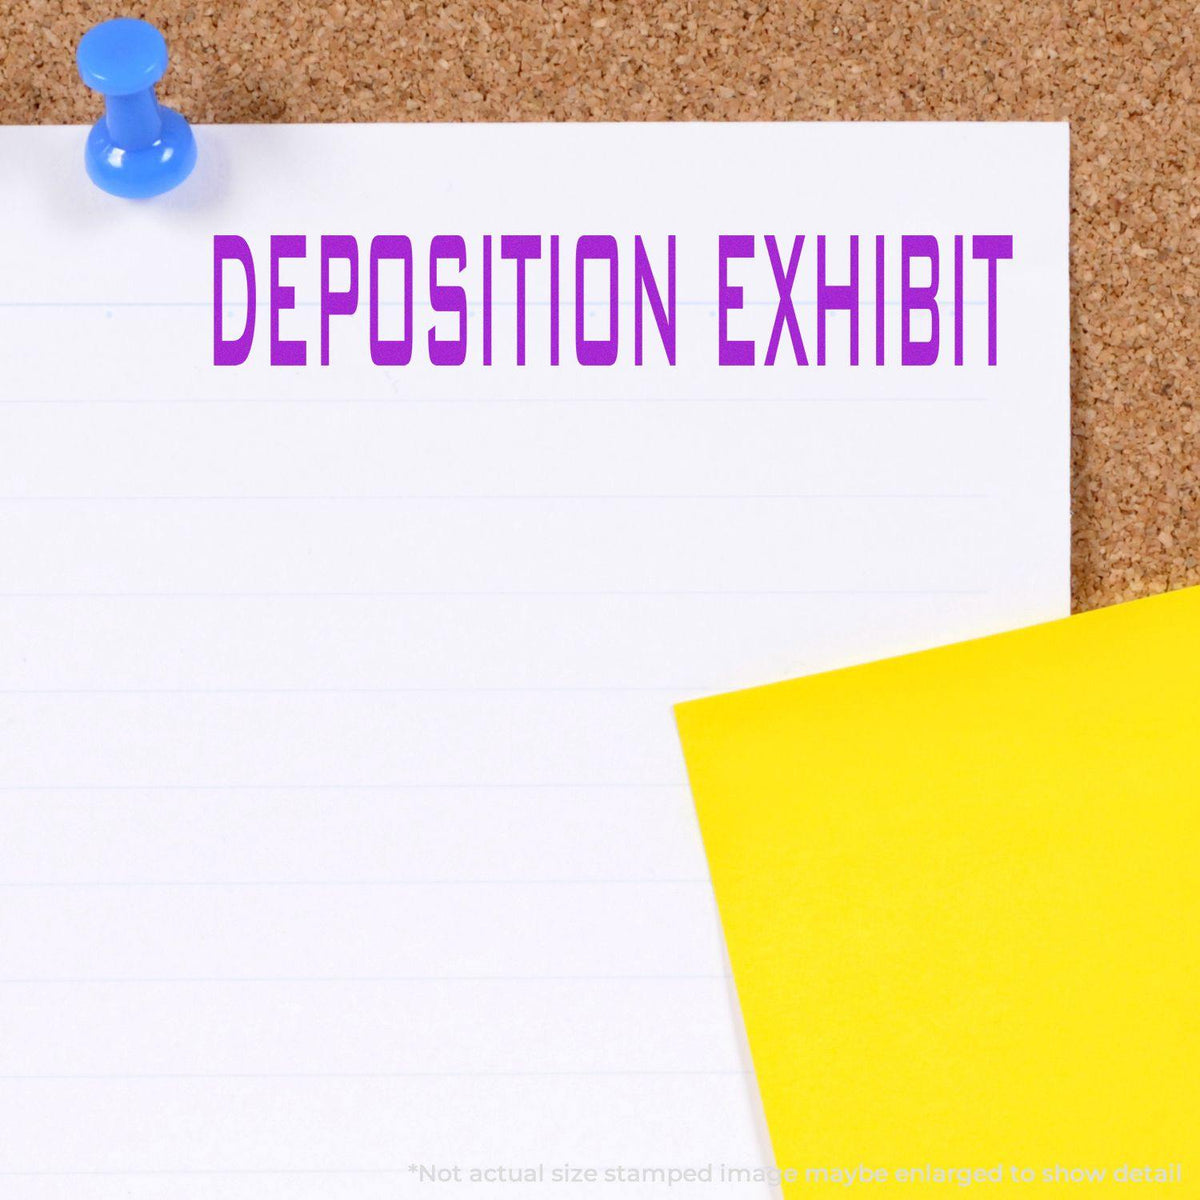 Deposition Exhibit Rubber Stamp In Use Photo